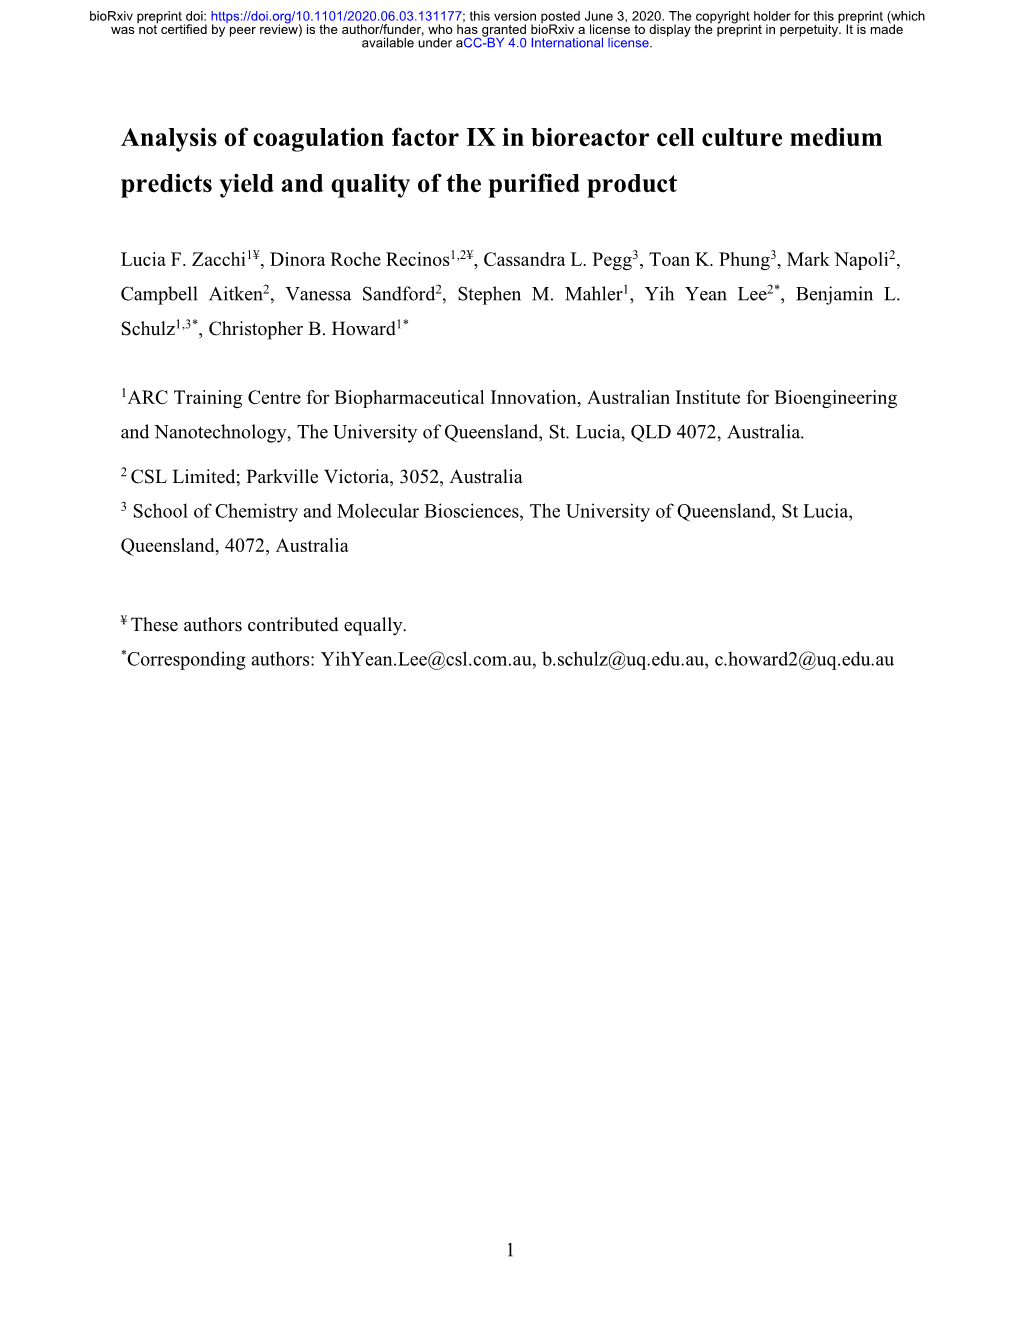 Analysis of Coagulation Factor IX in Bioreactor Cell Culture Medium Predicts Yield and Quality of the Purified Product